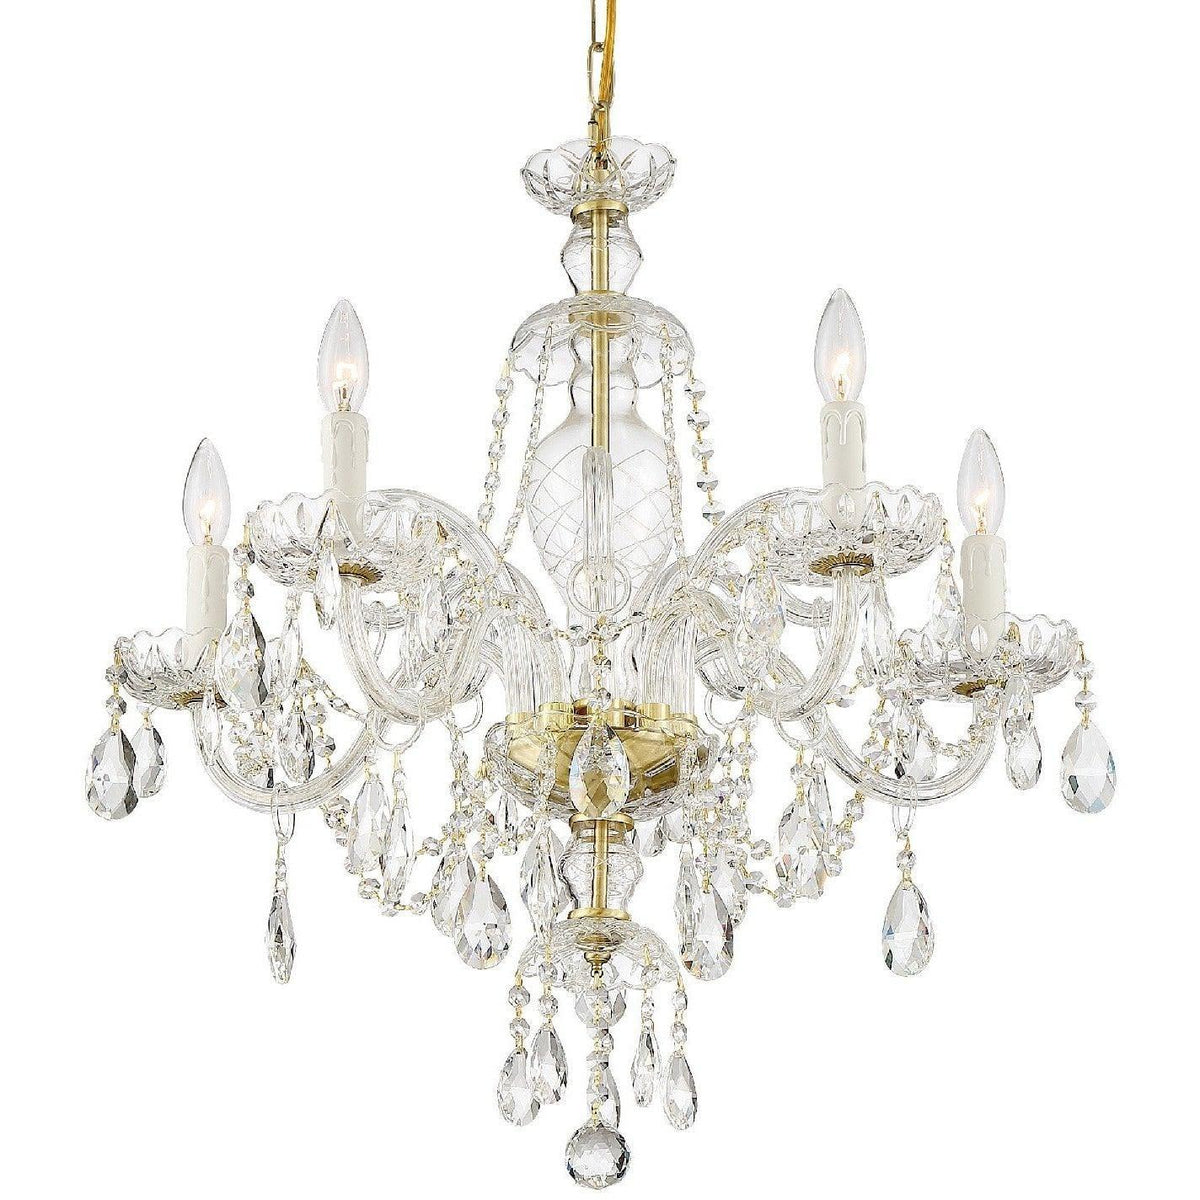 Crystorama - Candace Five Light Chandelier - CAN-A1306-PB-CL-S | Montreal Lighting & Hardware